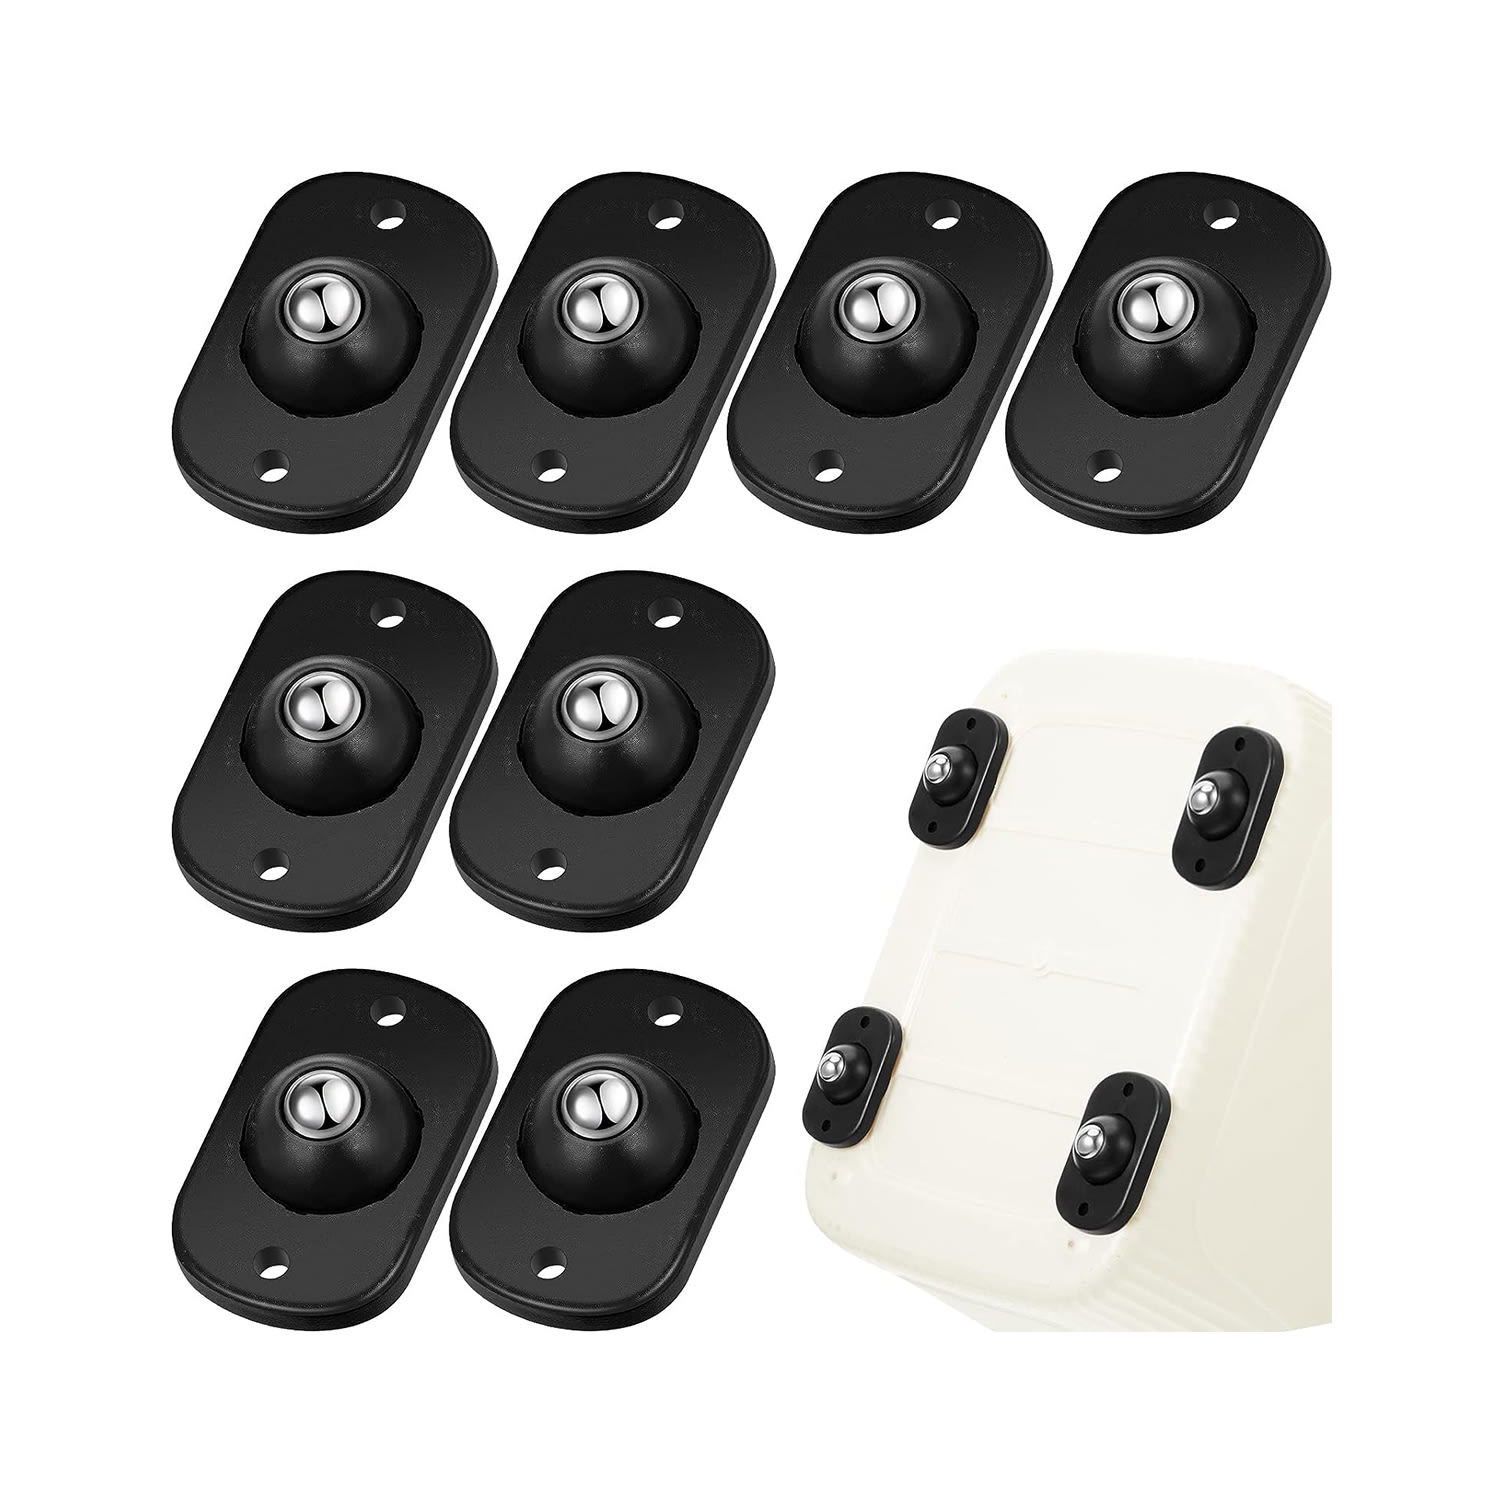 Self-Adhesive Mini Caster Wheels for Kitchen Appliances - Perfect